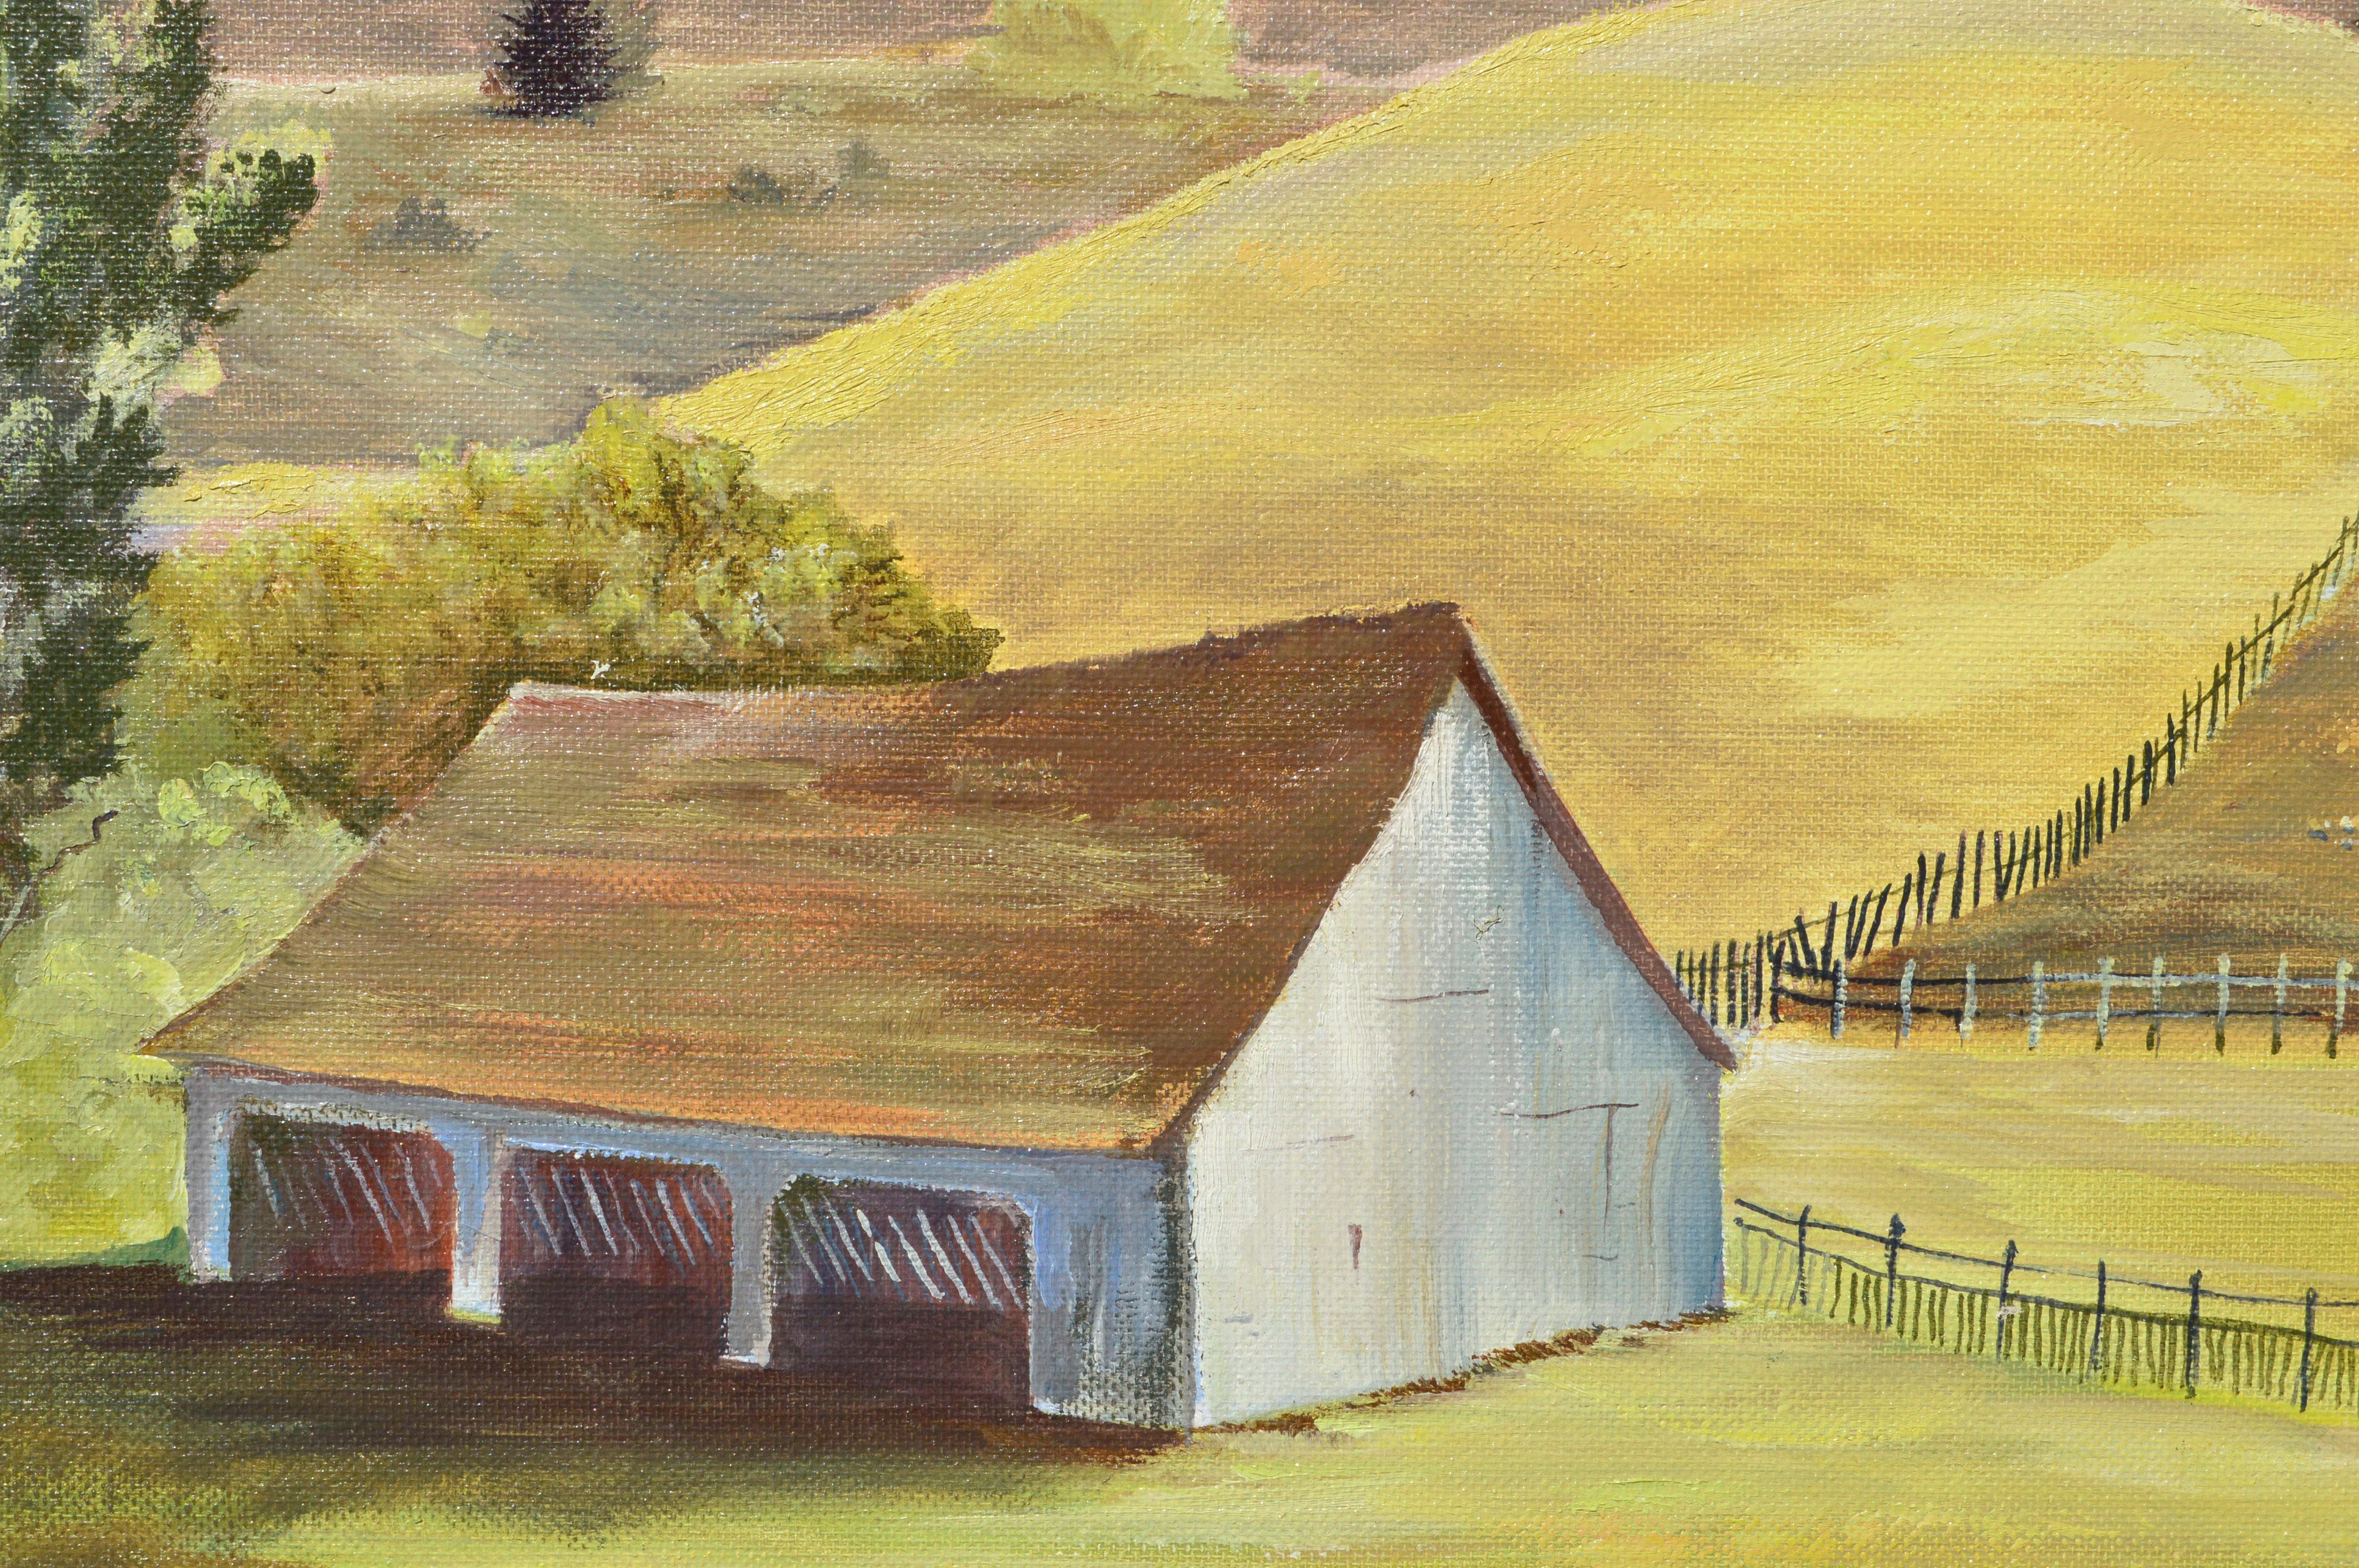 Farmhouse on the Hills Landscape - Painting by Don Hannan